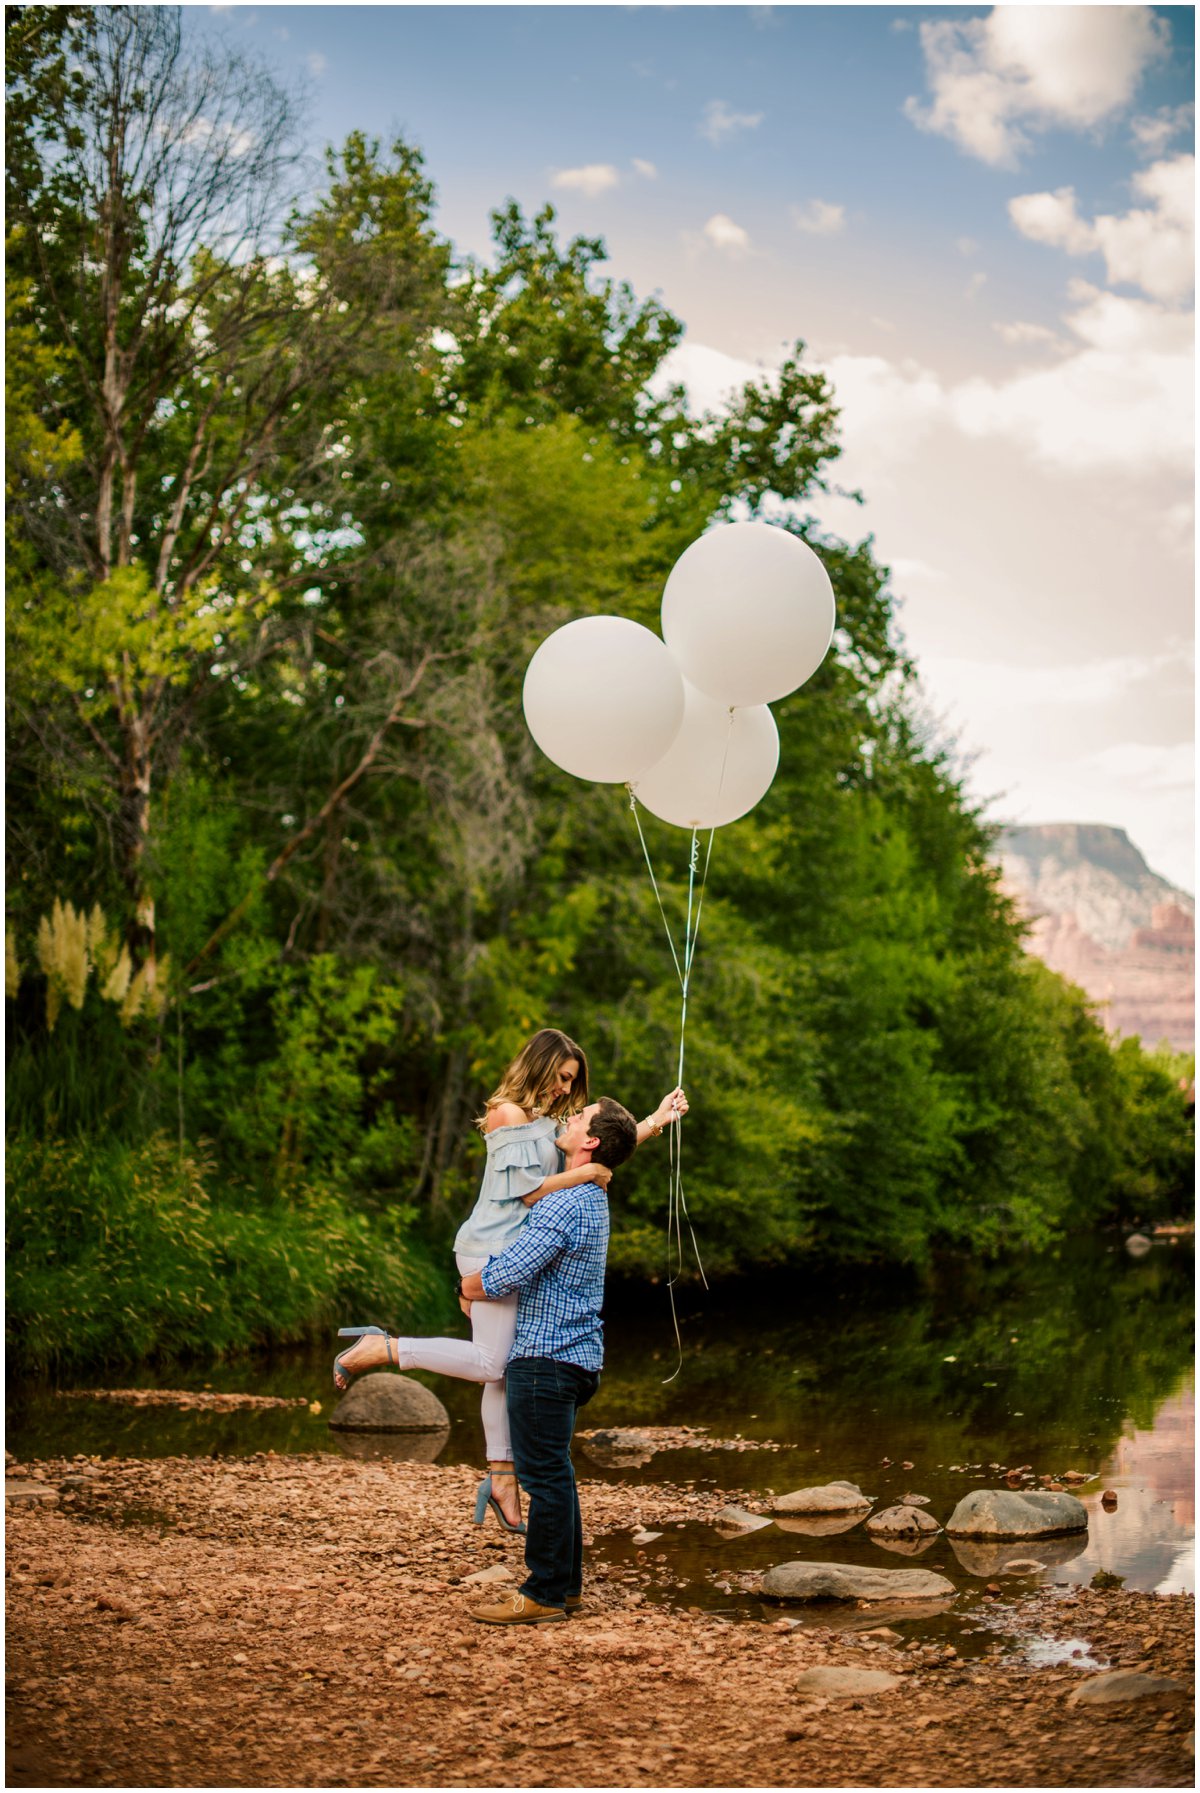  Summer Sedona Engagement Photos with balloons and the Sedona Red Rock Mountains in the background. 